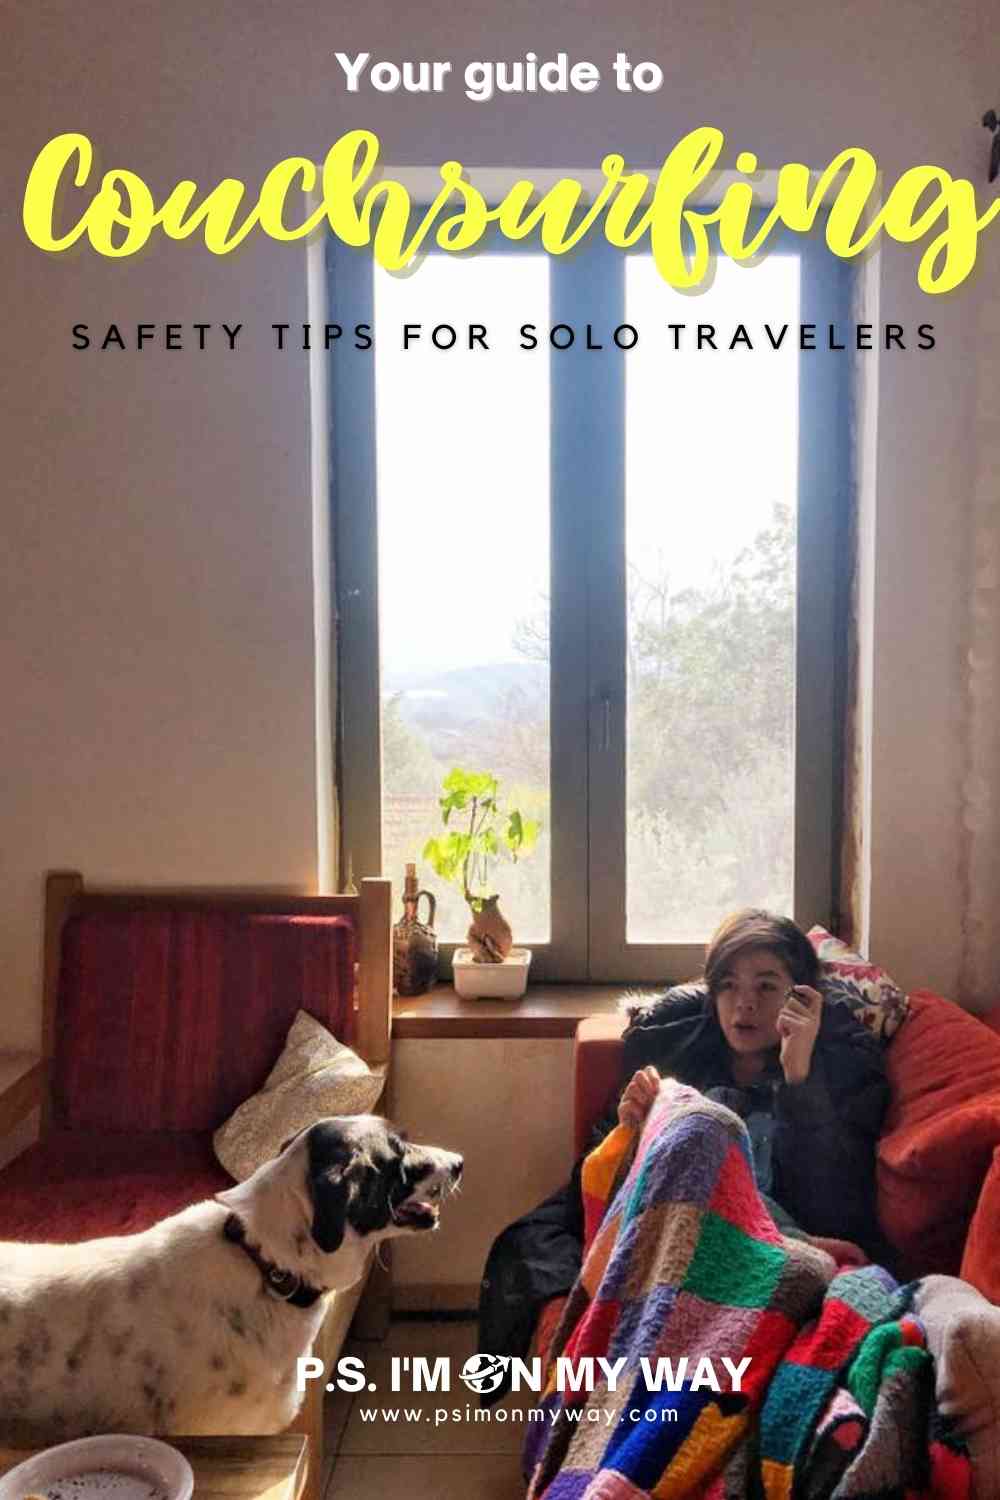 couchsurfing safety tips